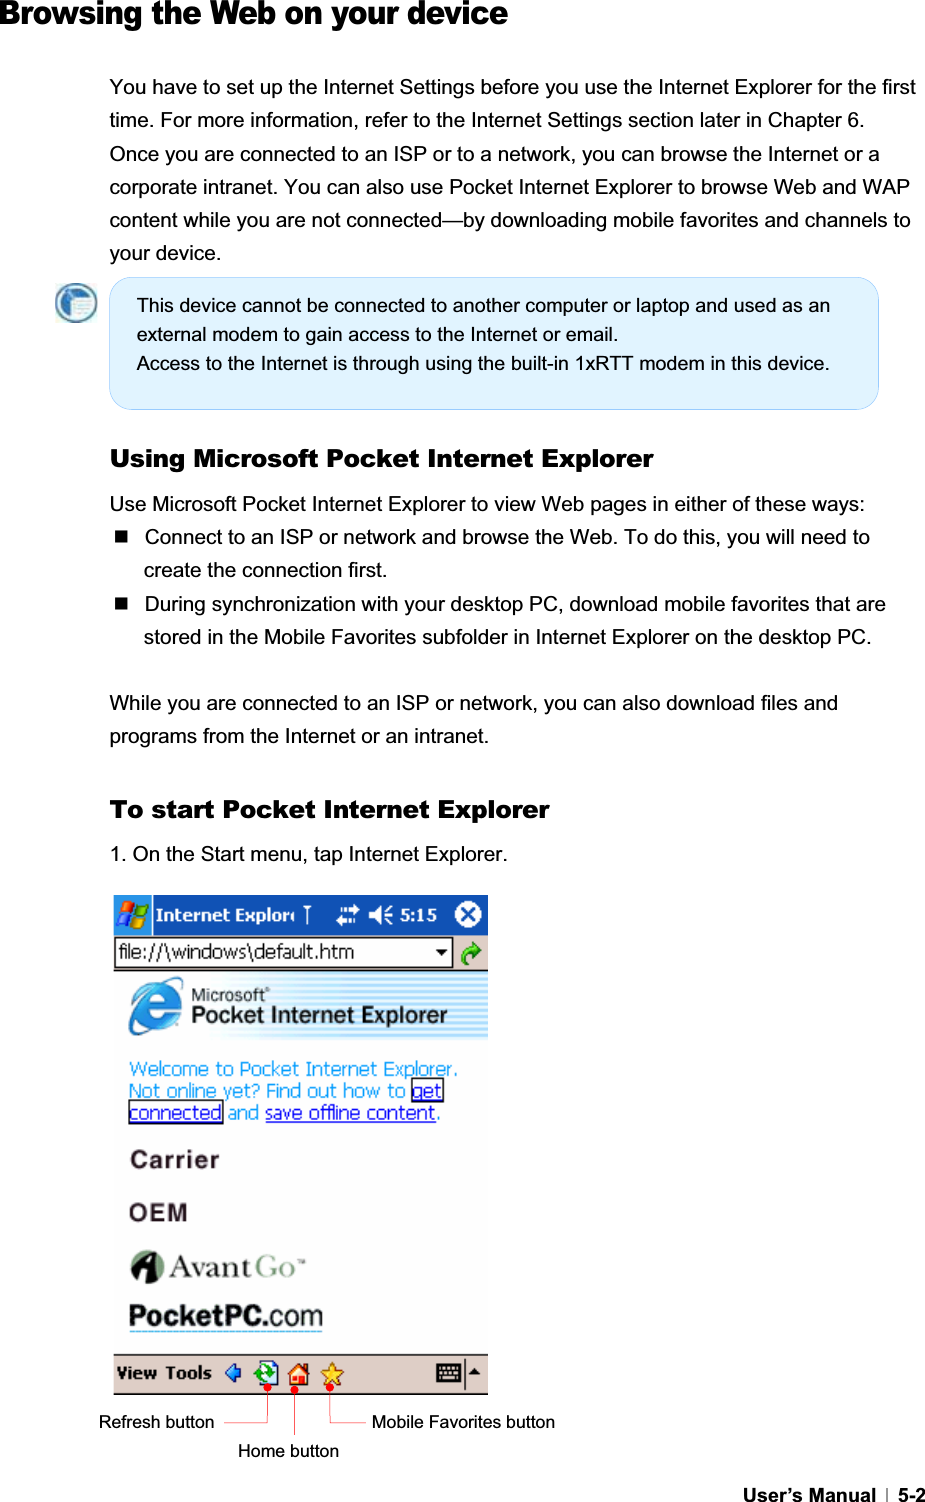 GUser’s Manual   5-2  Browsing the Web on your device You have to set up the Internet Settings before you use the Internet Explorer for the first time. For more information, refer to the Internet Settings section later in Chapter 6. Once you are connected to an ISP or to a network, you can browse the Internet or a corporate intranet. You can also use Pocket Internet Explorer to browse Web and WAP content while you are not connected—by downloading mobile favorites and channels to your device. Using Microsoft Pocket Internet Explorer Use Microsoft Pocket Internet Explorer to view Web pages in either of these ways:  Connect to an ISP or network and browse the Web. To do this, you will need to create the connection first.   During synchronization with your desktop PC, download mobile favorites that are stored in the Mobile Favorites subfolder in Internet Explorer on the desktop PC. While you are connected to an ISP or network, you can also download files and programs from the Internet or an intranet. To start Pocket Internet Explorer 1. On the Start menu, tap Internet Explorer. Mobile Favorites button Home button Refresh buttonThis device cannot be connected to another computer or laptop and used as an external modem to gain access to the Internet or email. Access to the Internet is through using the built-in 1xRTT modem in this device. 